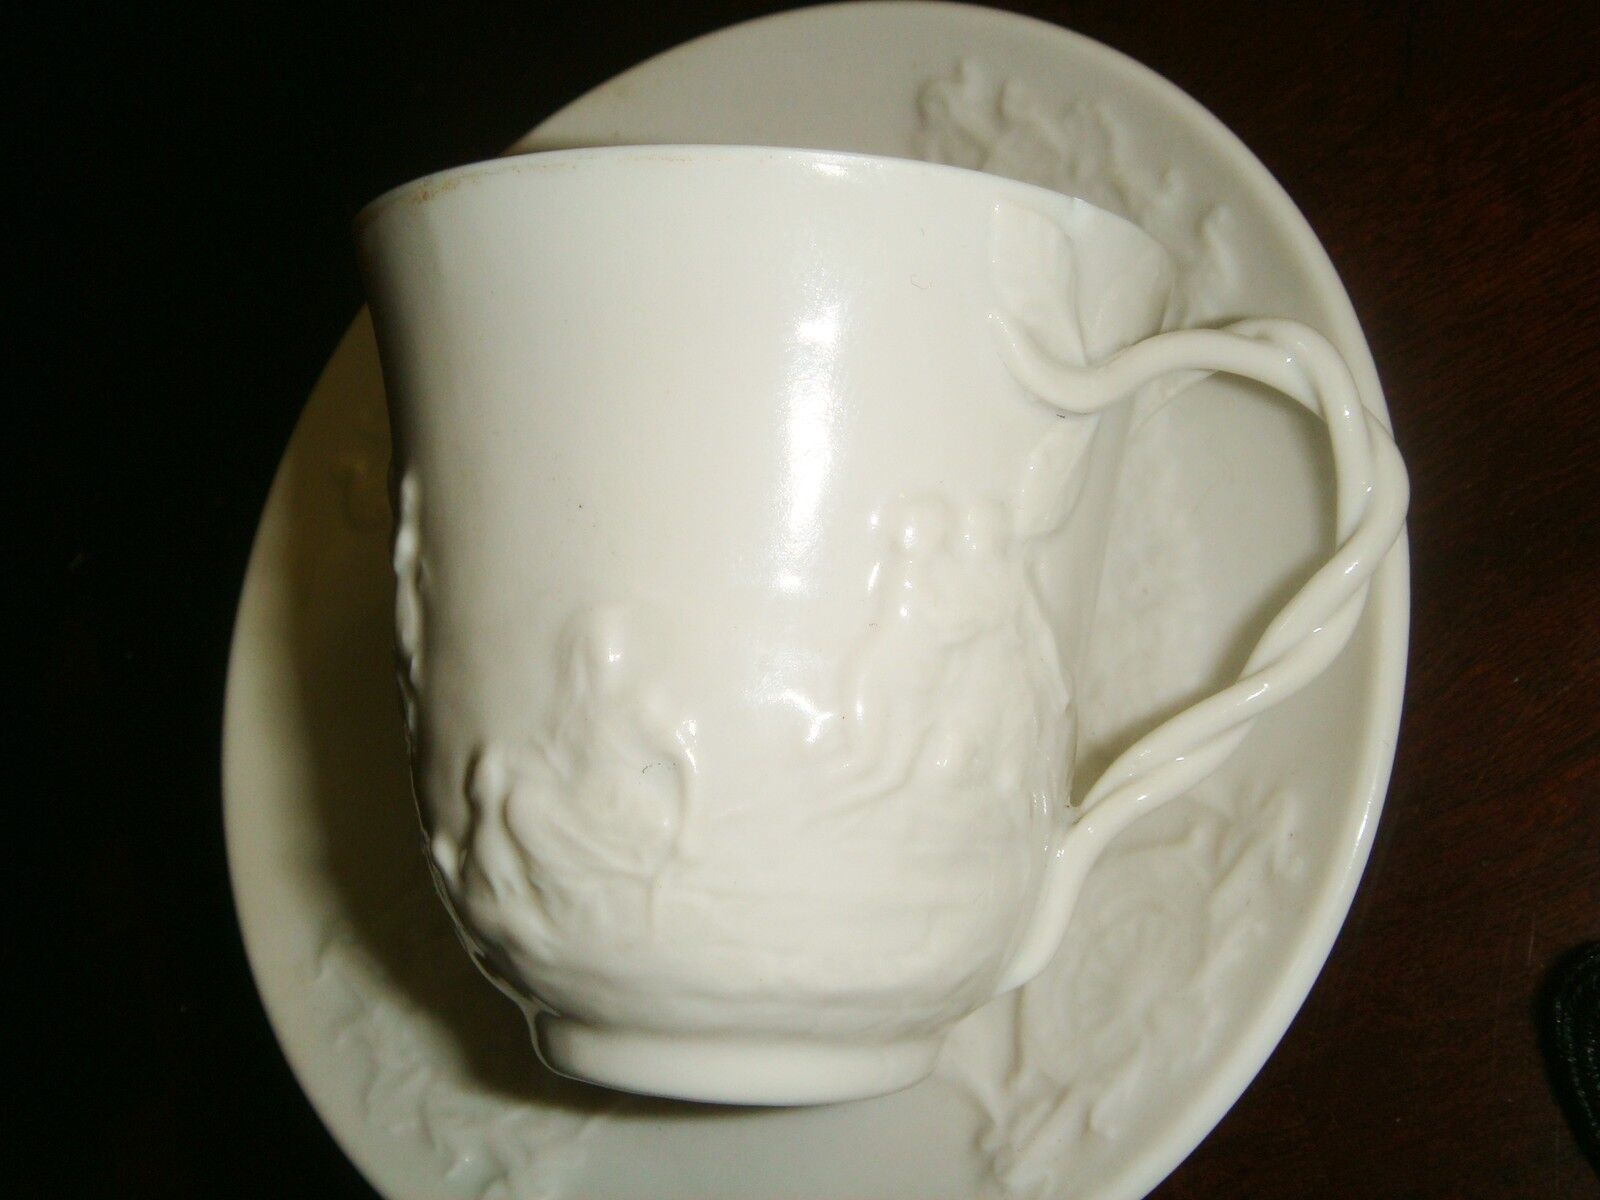 Primary image for ERNST BOHNE SONS- Rudolstadt, Germany coffee CUP AND SAUCER - c1900s[*8]